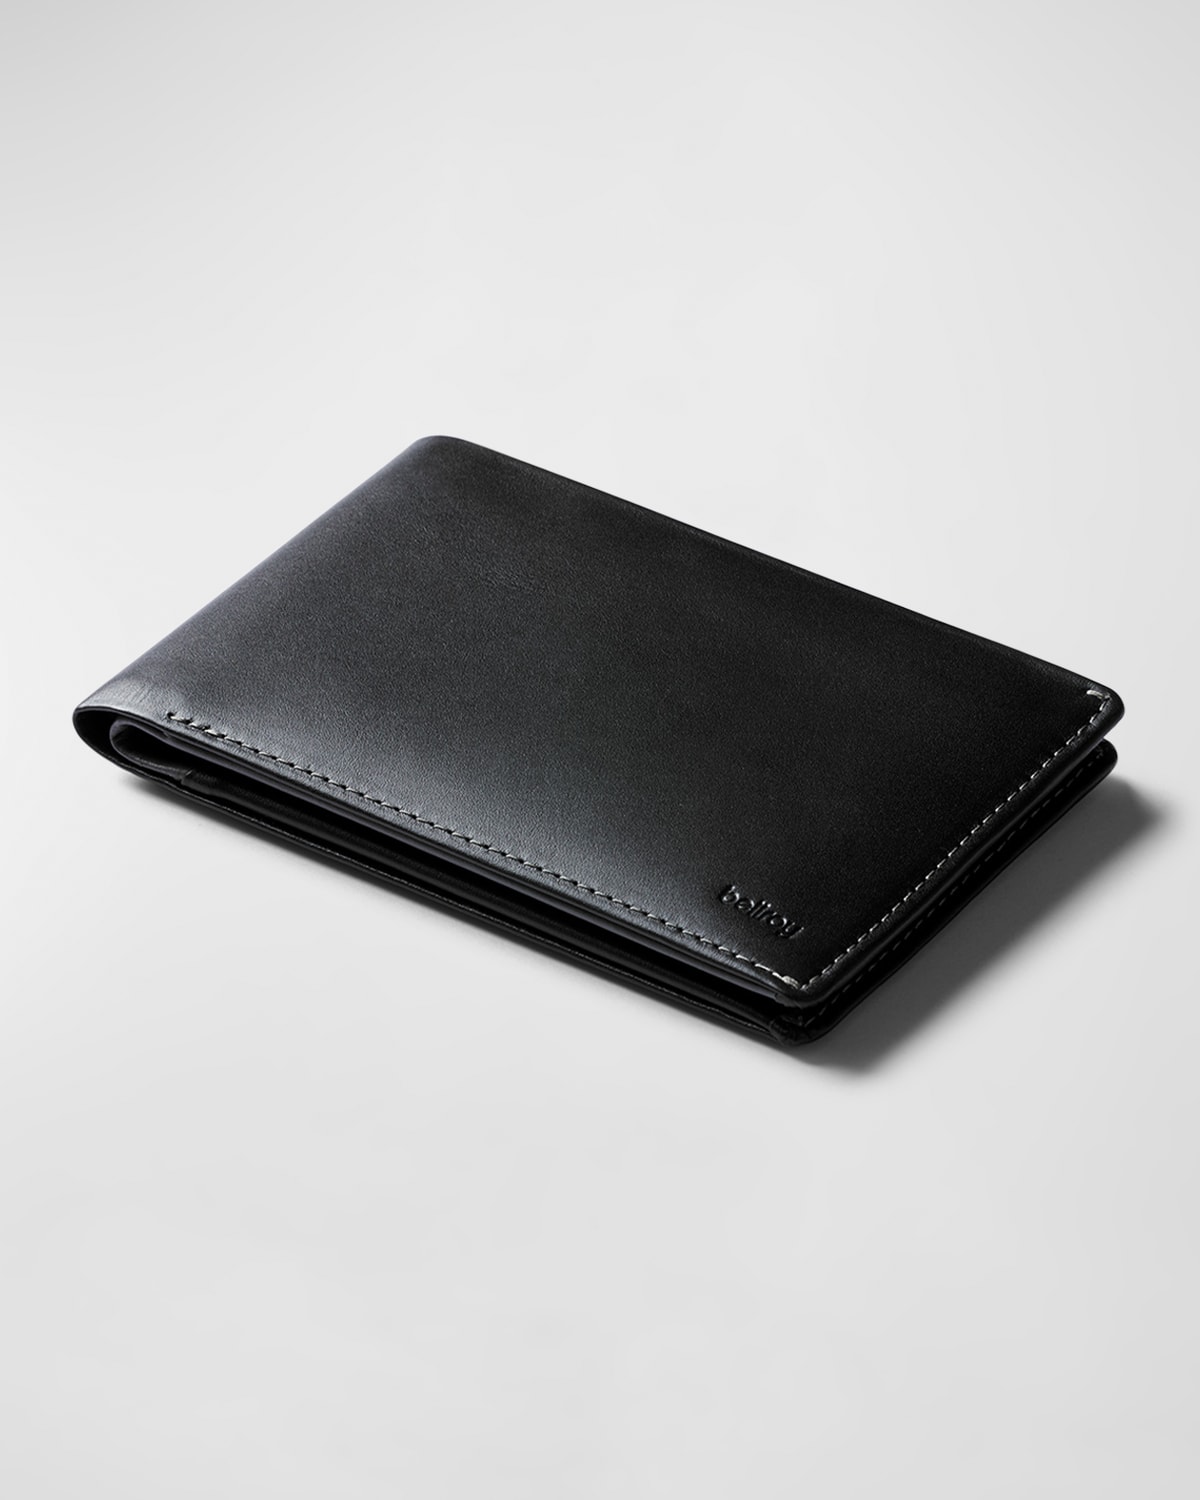 Bellroy Men's Travel Bifold Wallet with RFID Protection